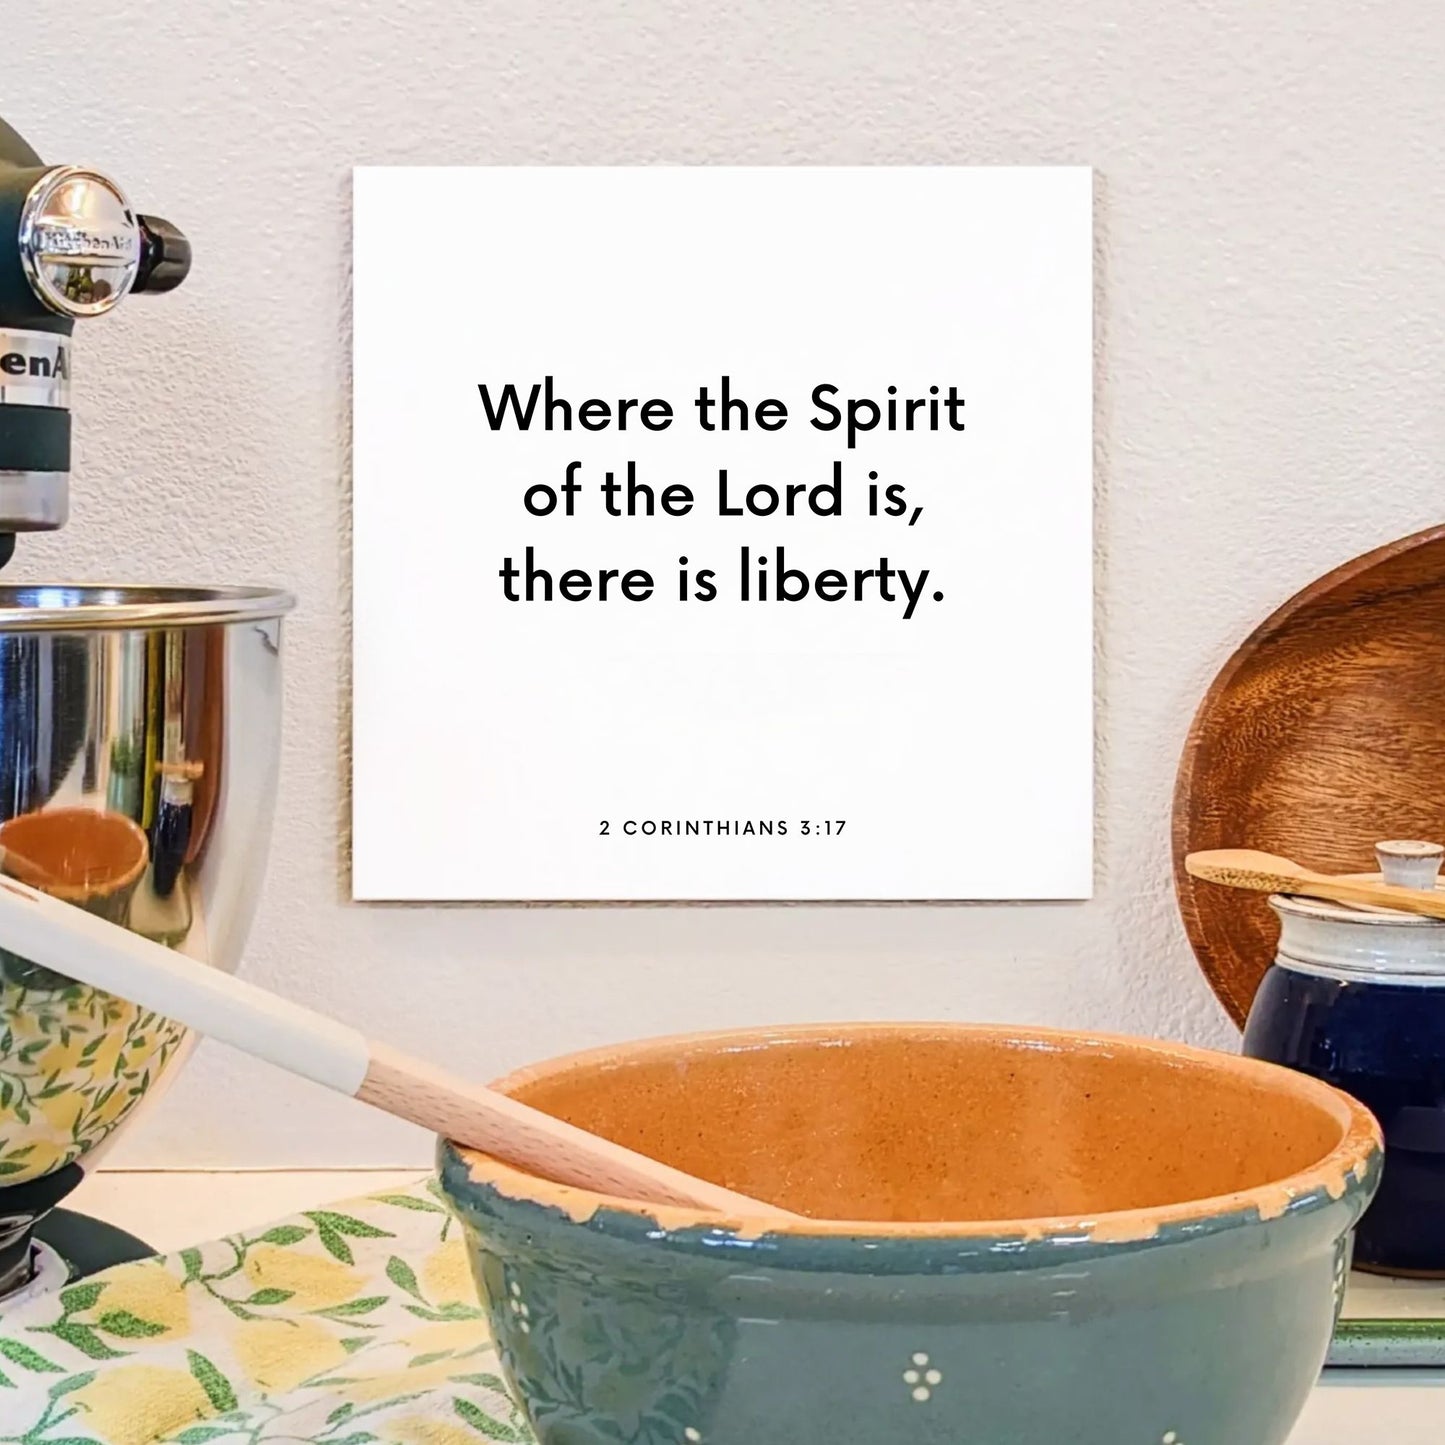 Kitchen mouting of the scripture tile for 2 Corinthians 3:17 - "Where the Spirit of the Lord is, there is liberty"